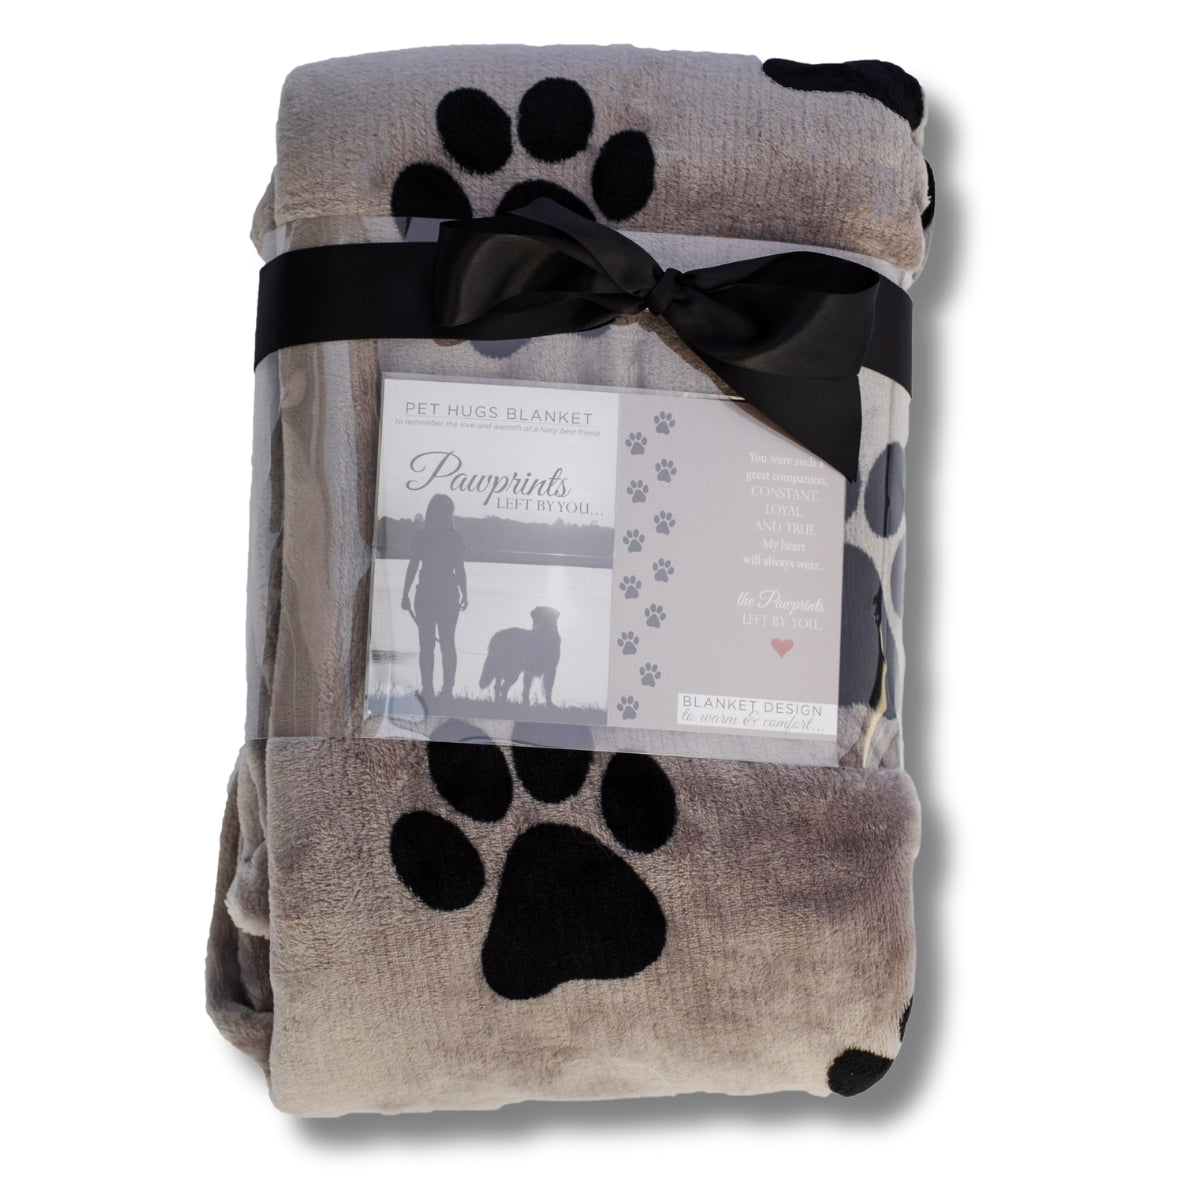 Pawprints Left by You Blanket packaged with Black satin  bow, ready for giving.